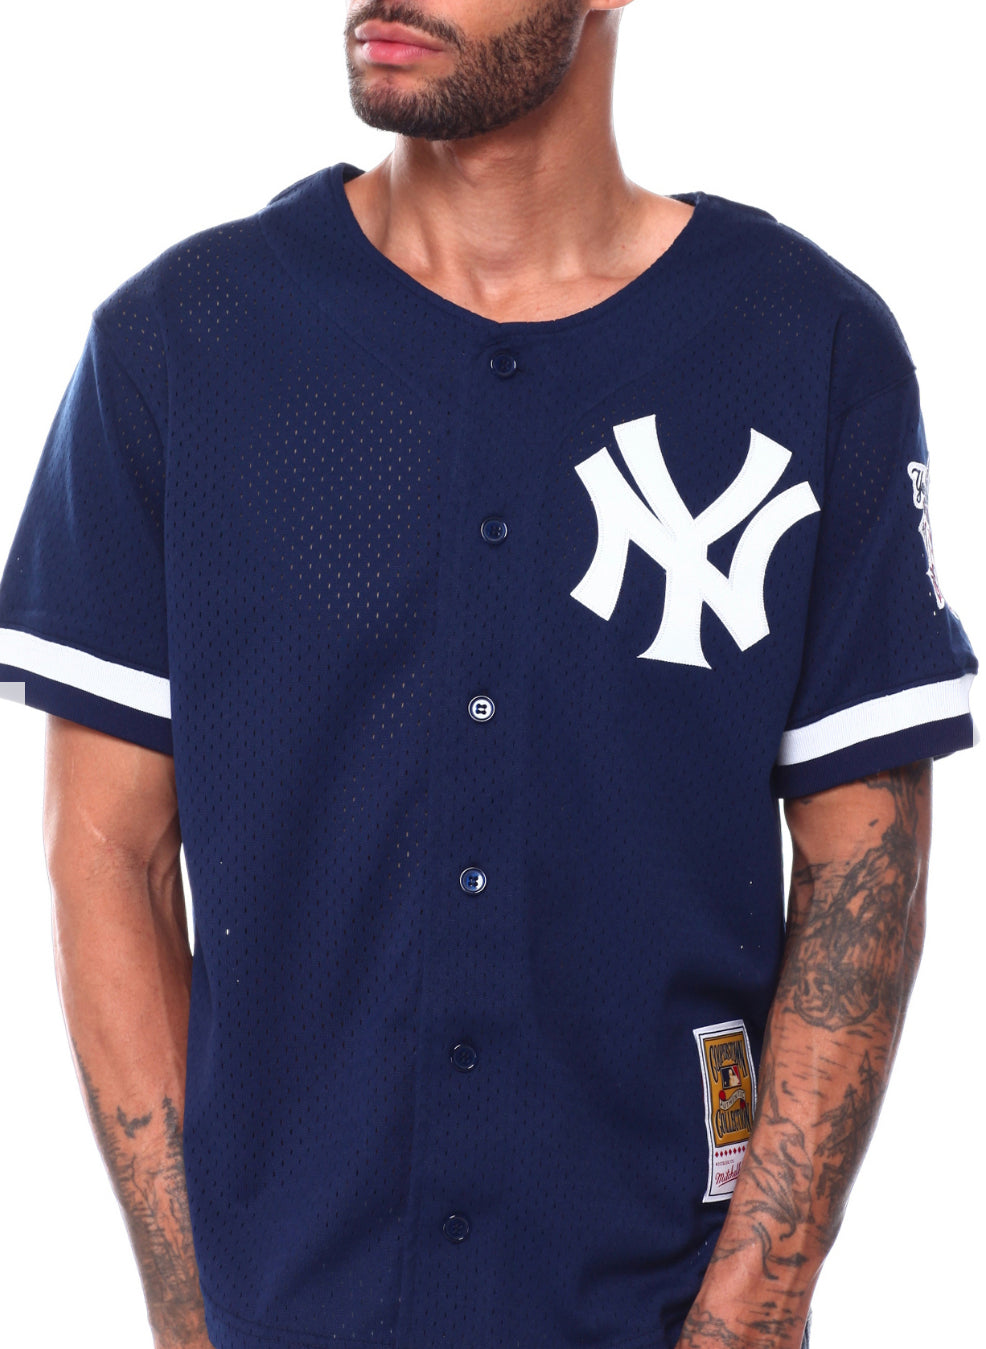 New York Yankees 1998 Derek Jeter Mitchell and Ness authentic jersey